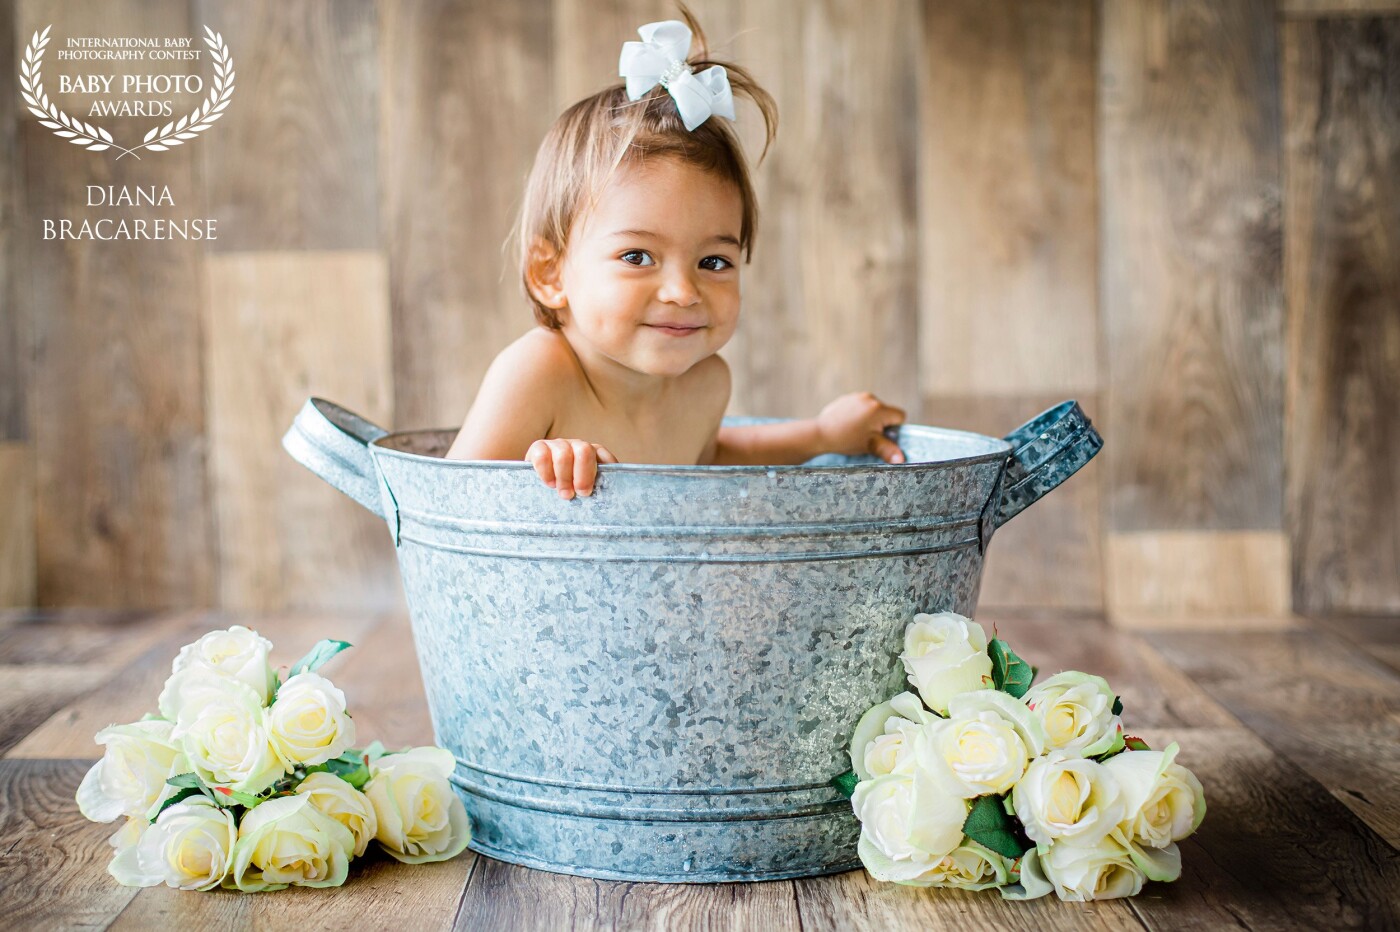 Elegant and delicate, these are just a few words that come up when we think of a milk bath with babies.  Babies have to feel comfortable while being photographed. We had music and Marcela had a great time while I captured the decisive moments! 